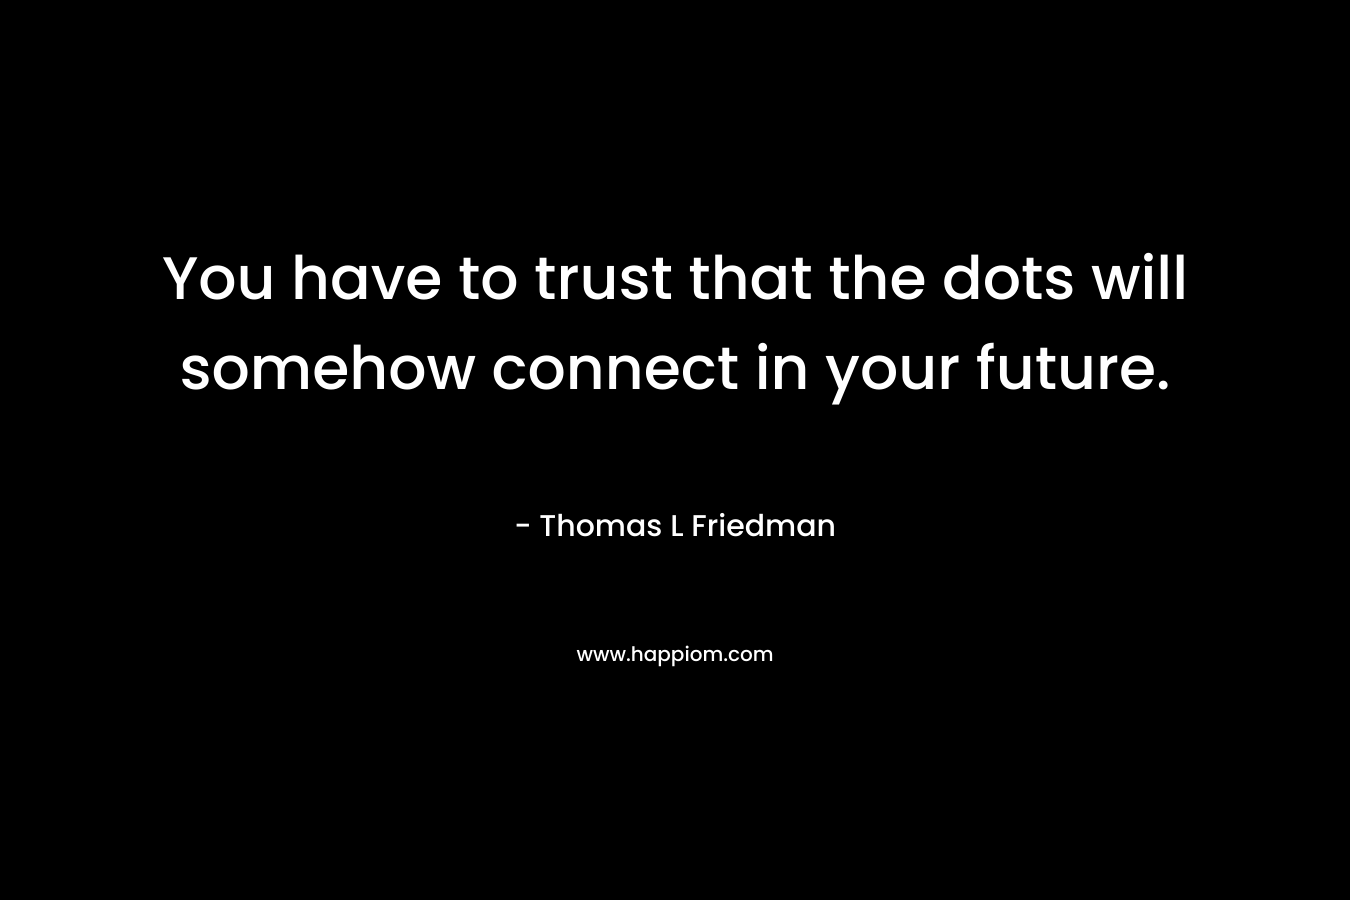 You have to trust that the dots will somehow connect in your future.